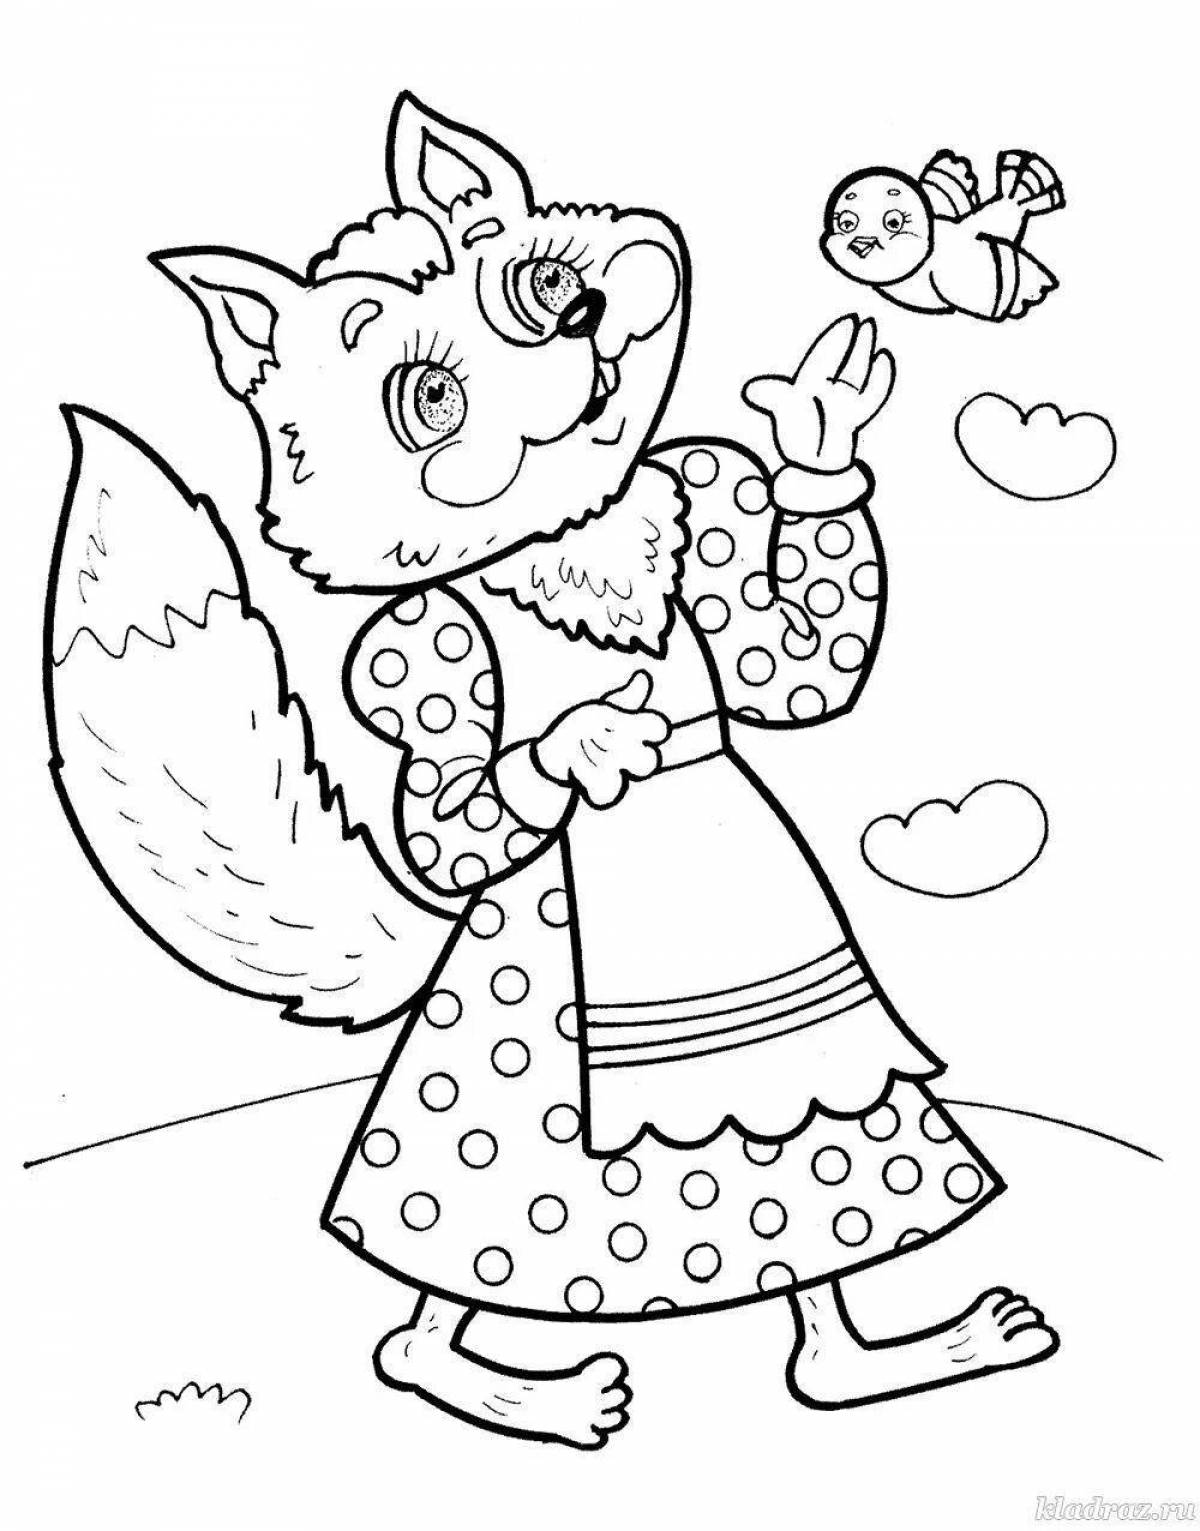 Radiant coloring page fairy fox with rolling pin